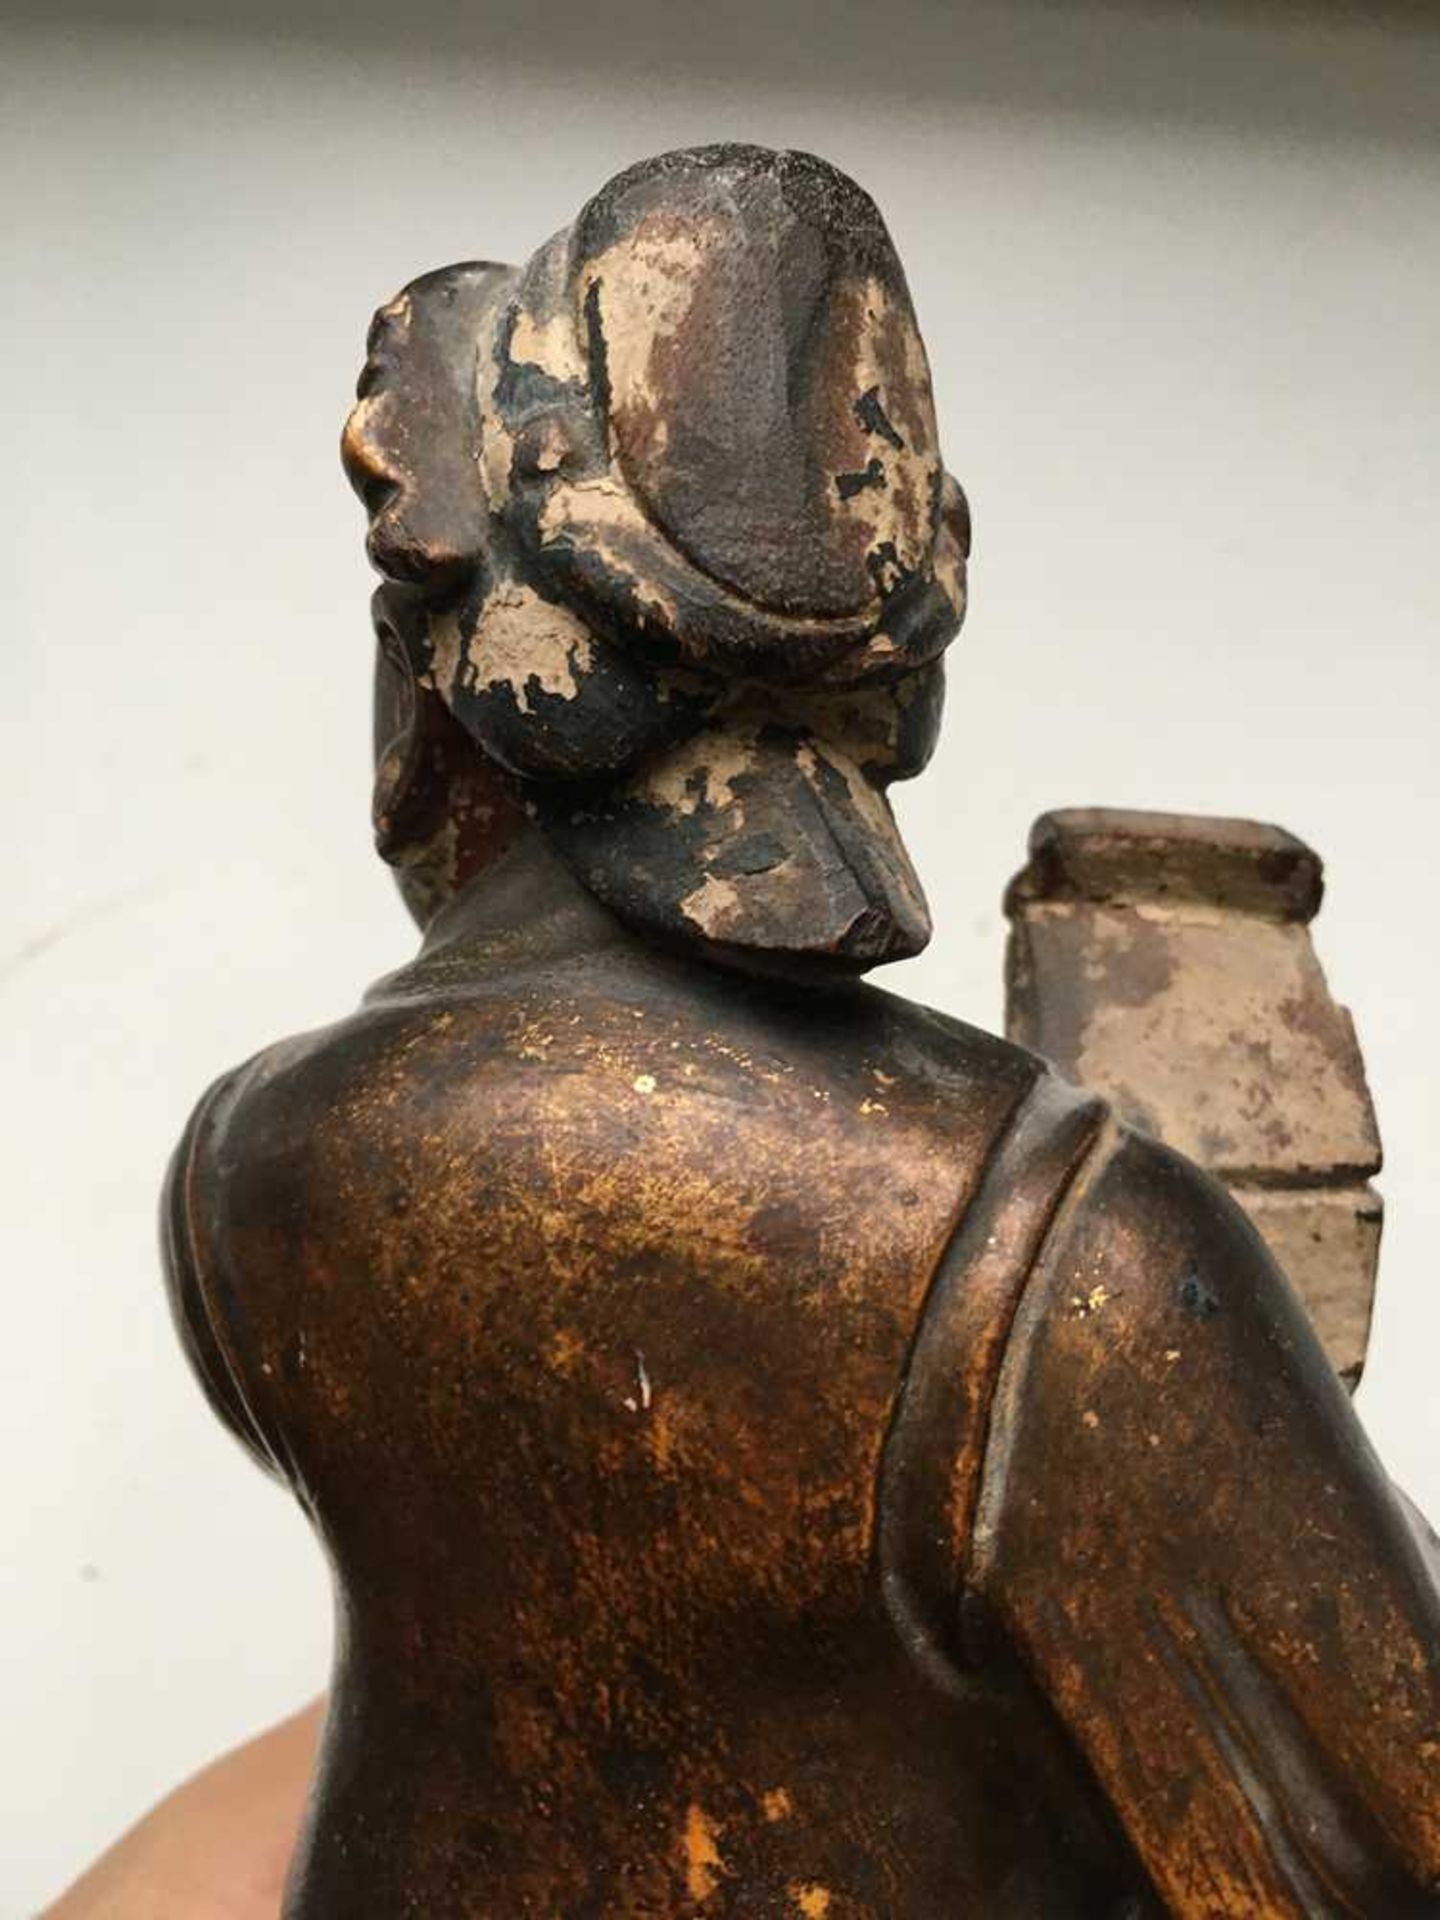 GILT-LACQUERED WOODEN FIGURE OF A DAOIST IMMORTAL QING DYNASTY, 18TH-19TH CENTURY - Image 13 of 20